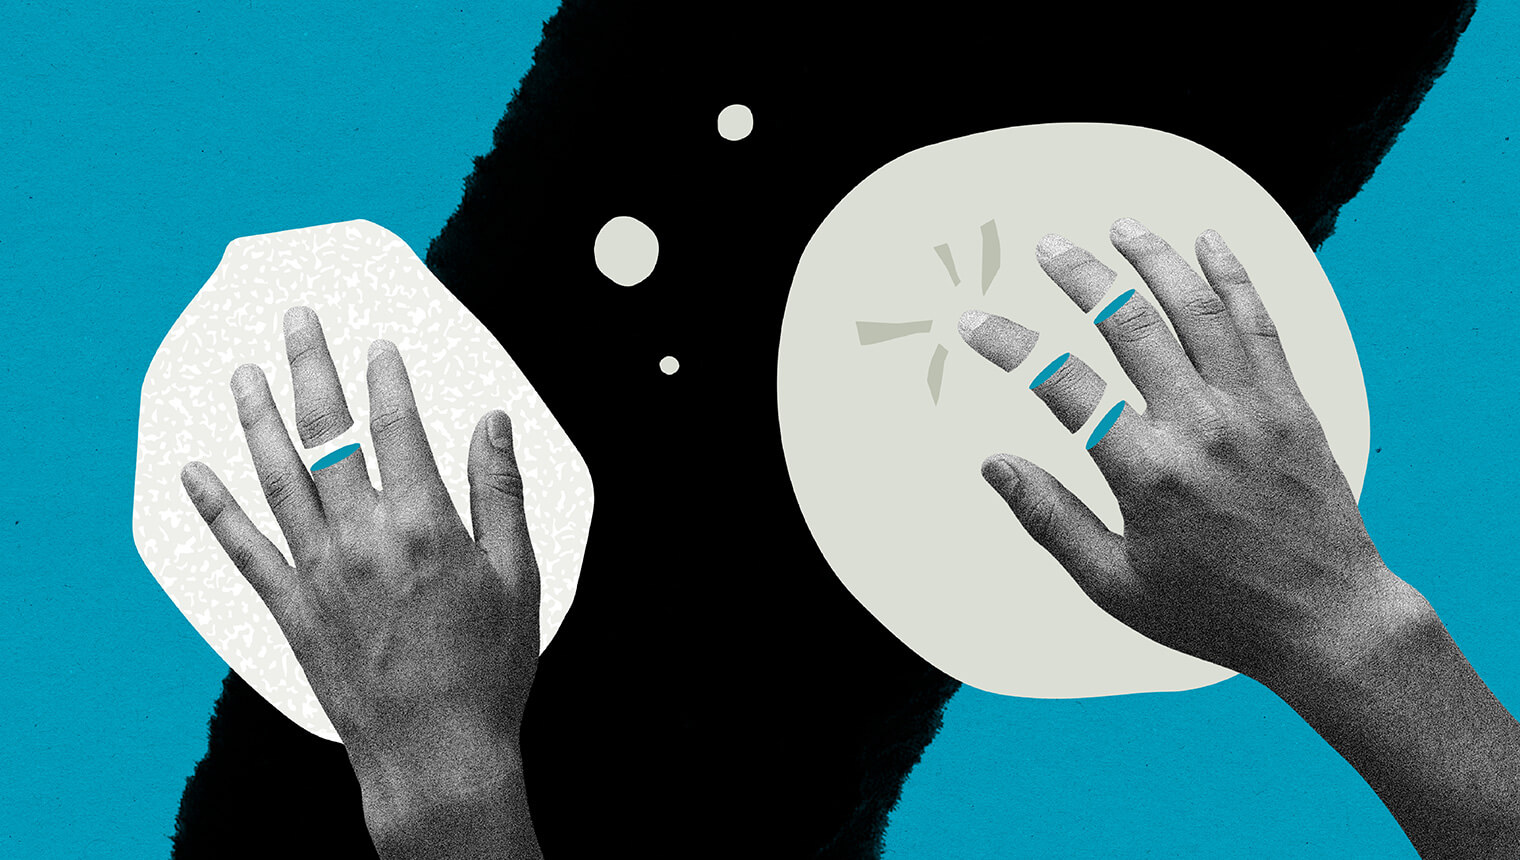 A thumbnail for my brand design portfolio for the Social Proof Sidekick ebook. The image shows a collage with two black and white hands hovering over a blue and black background.